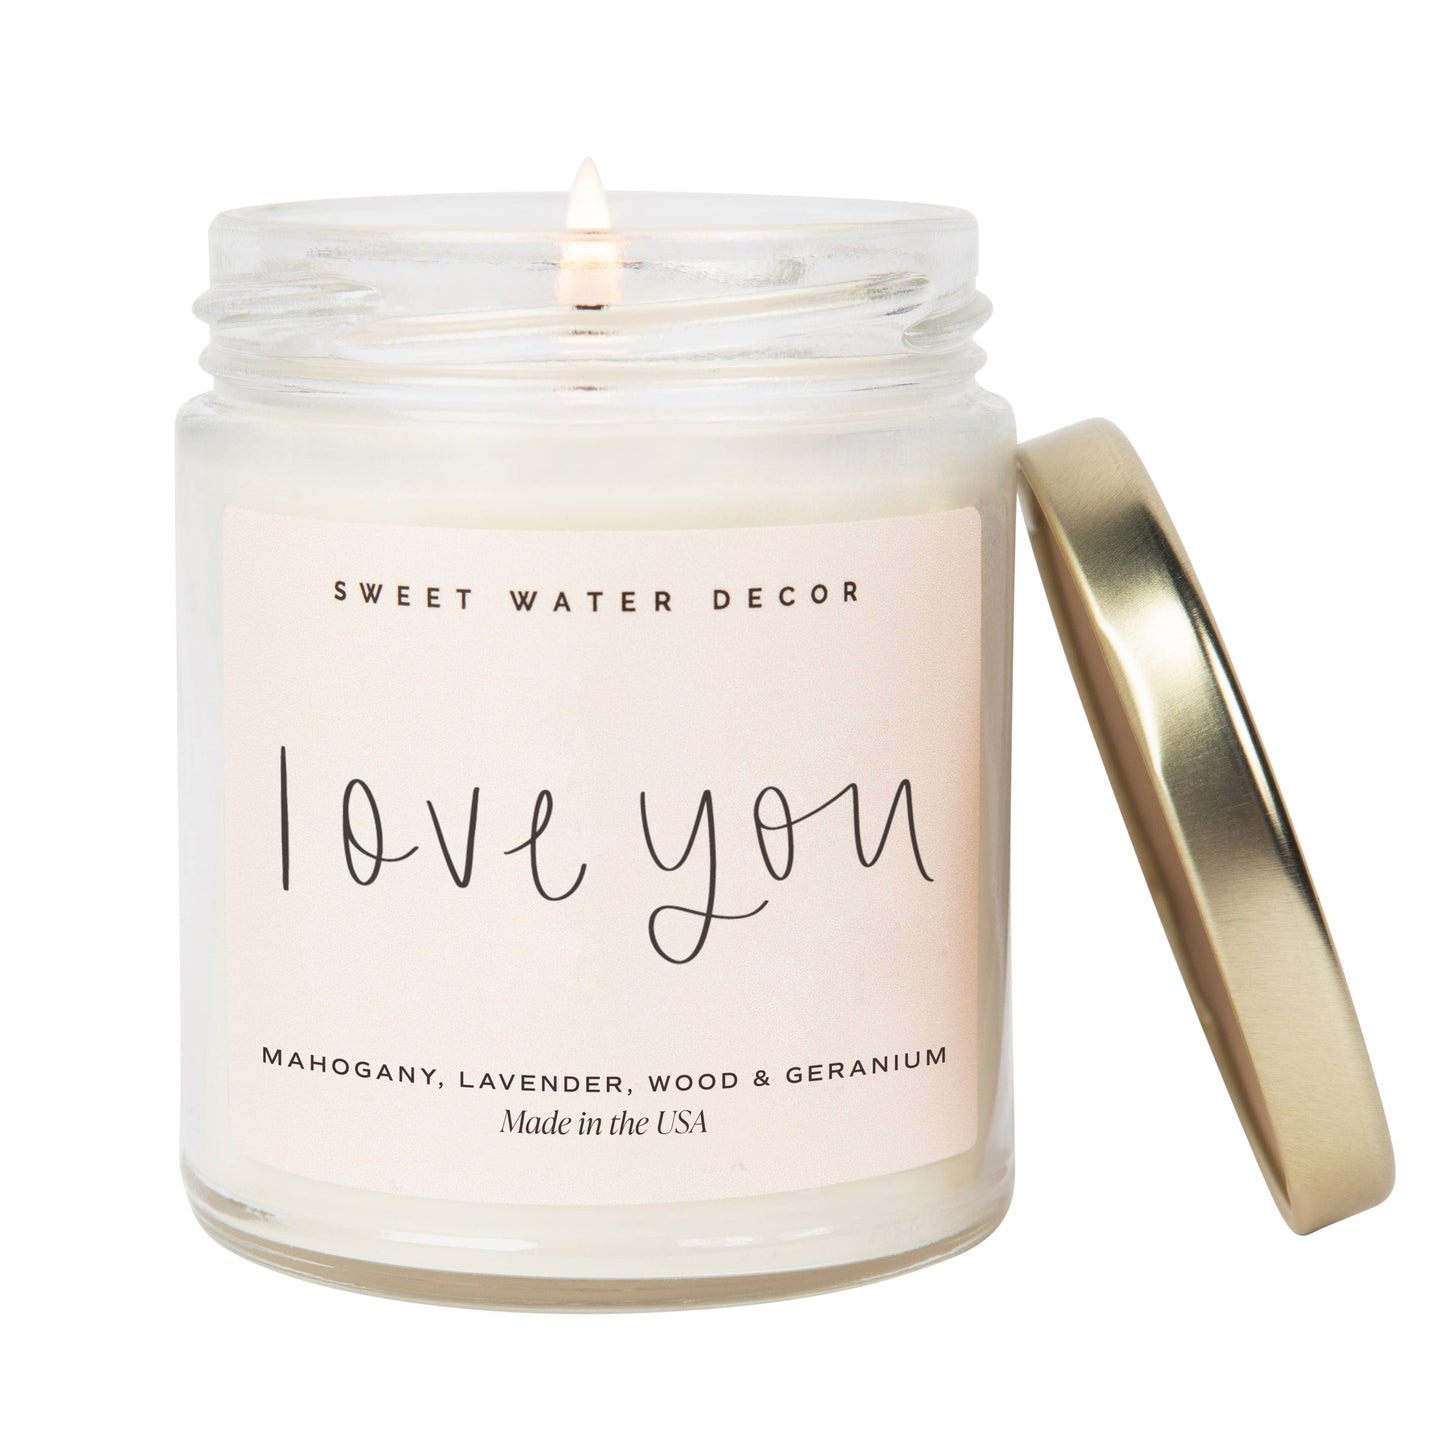 Sweet Water Decor - Love You - 9 oz. Soy Candle